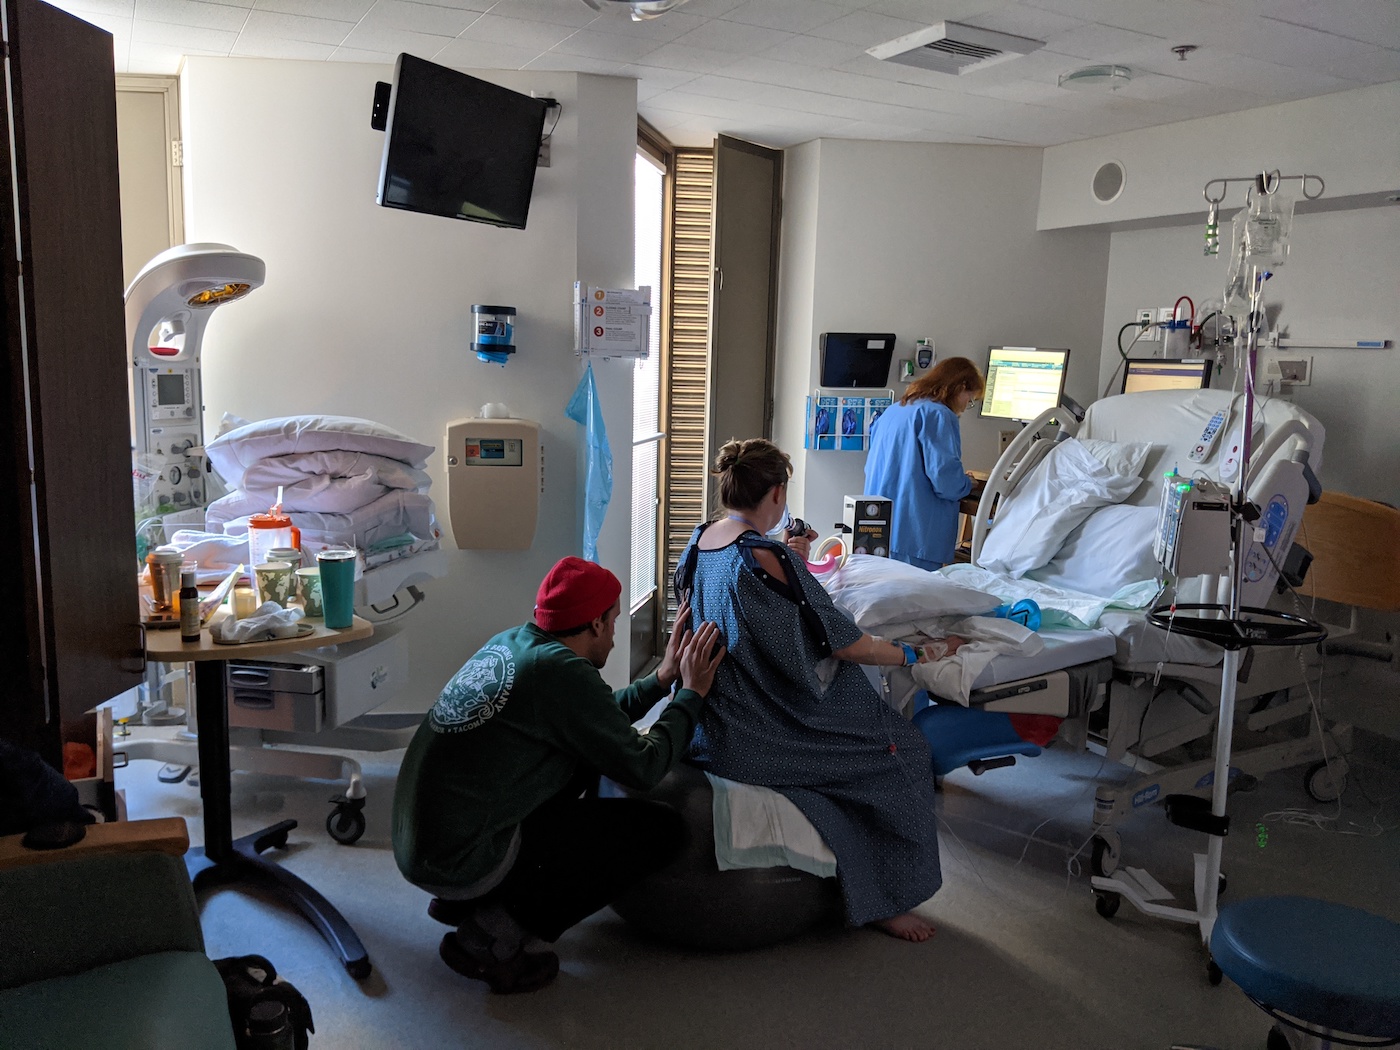 Partner supporting birthing person during labor